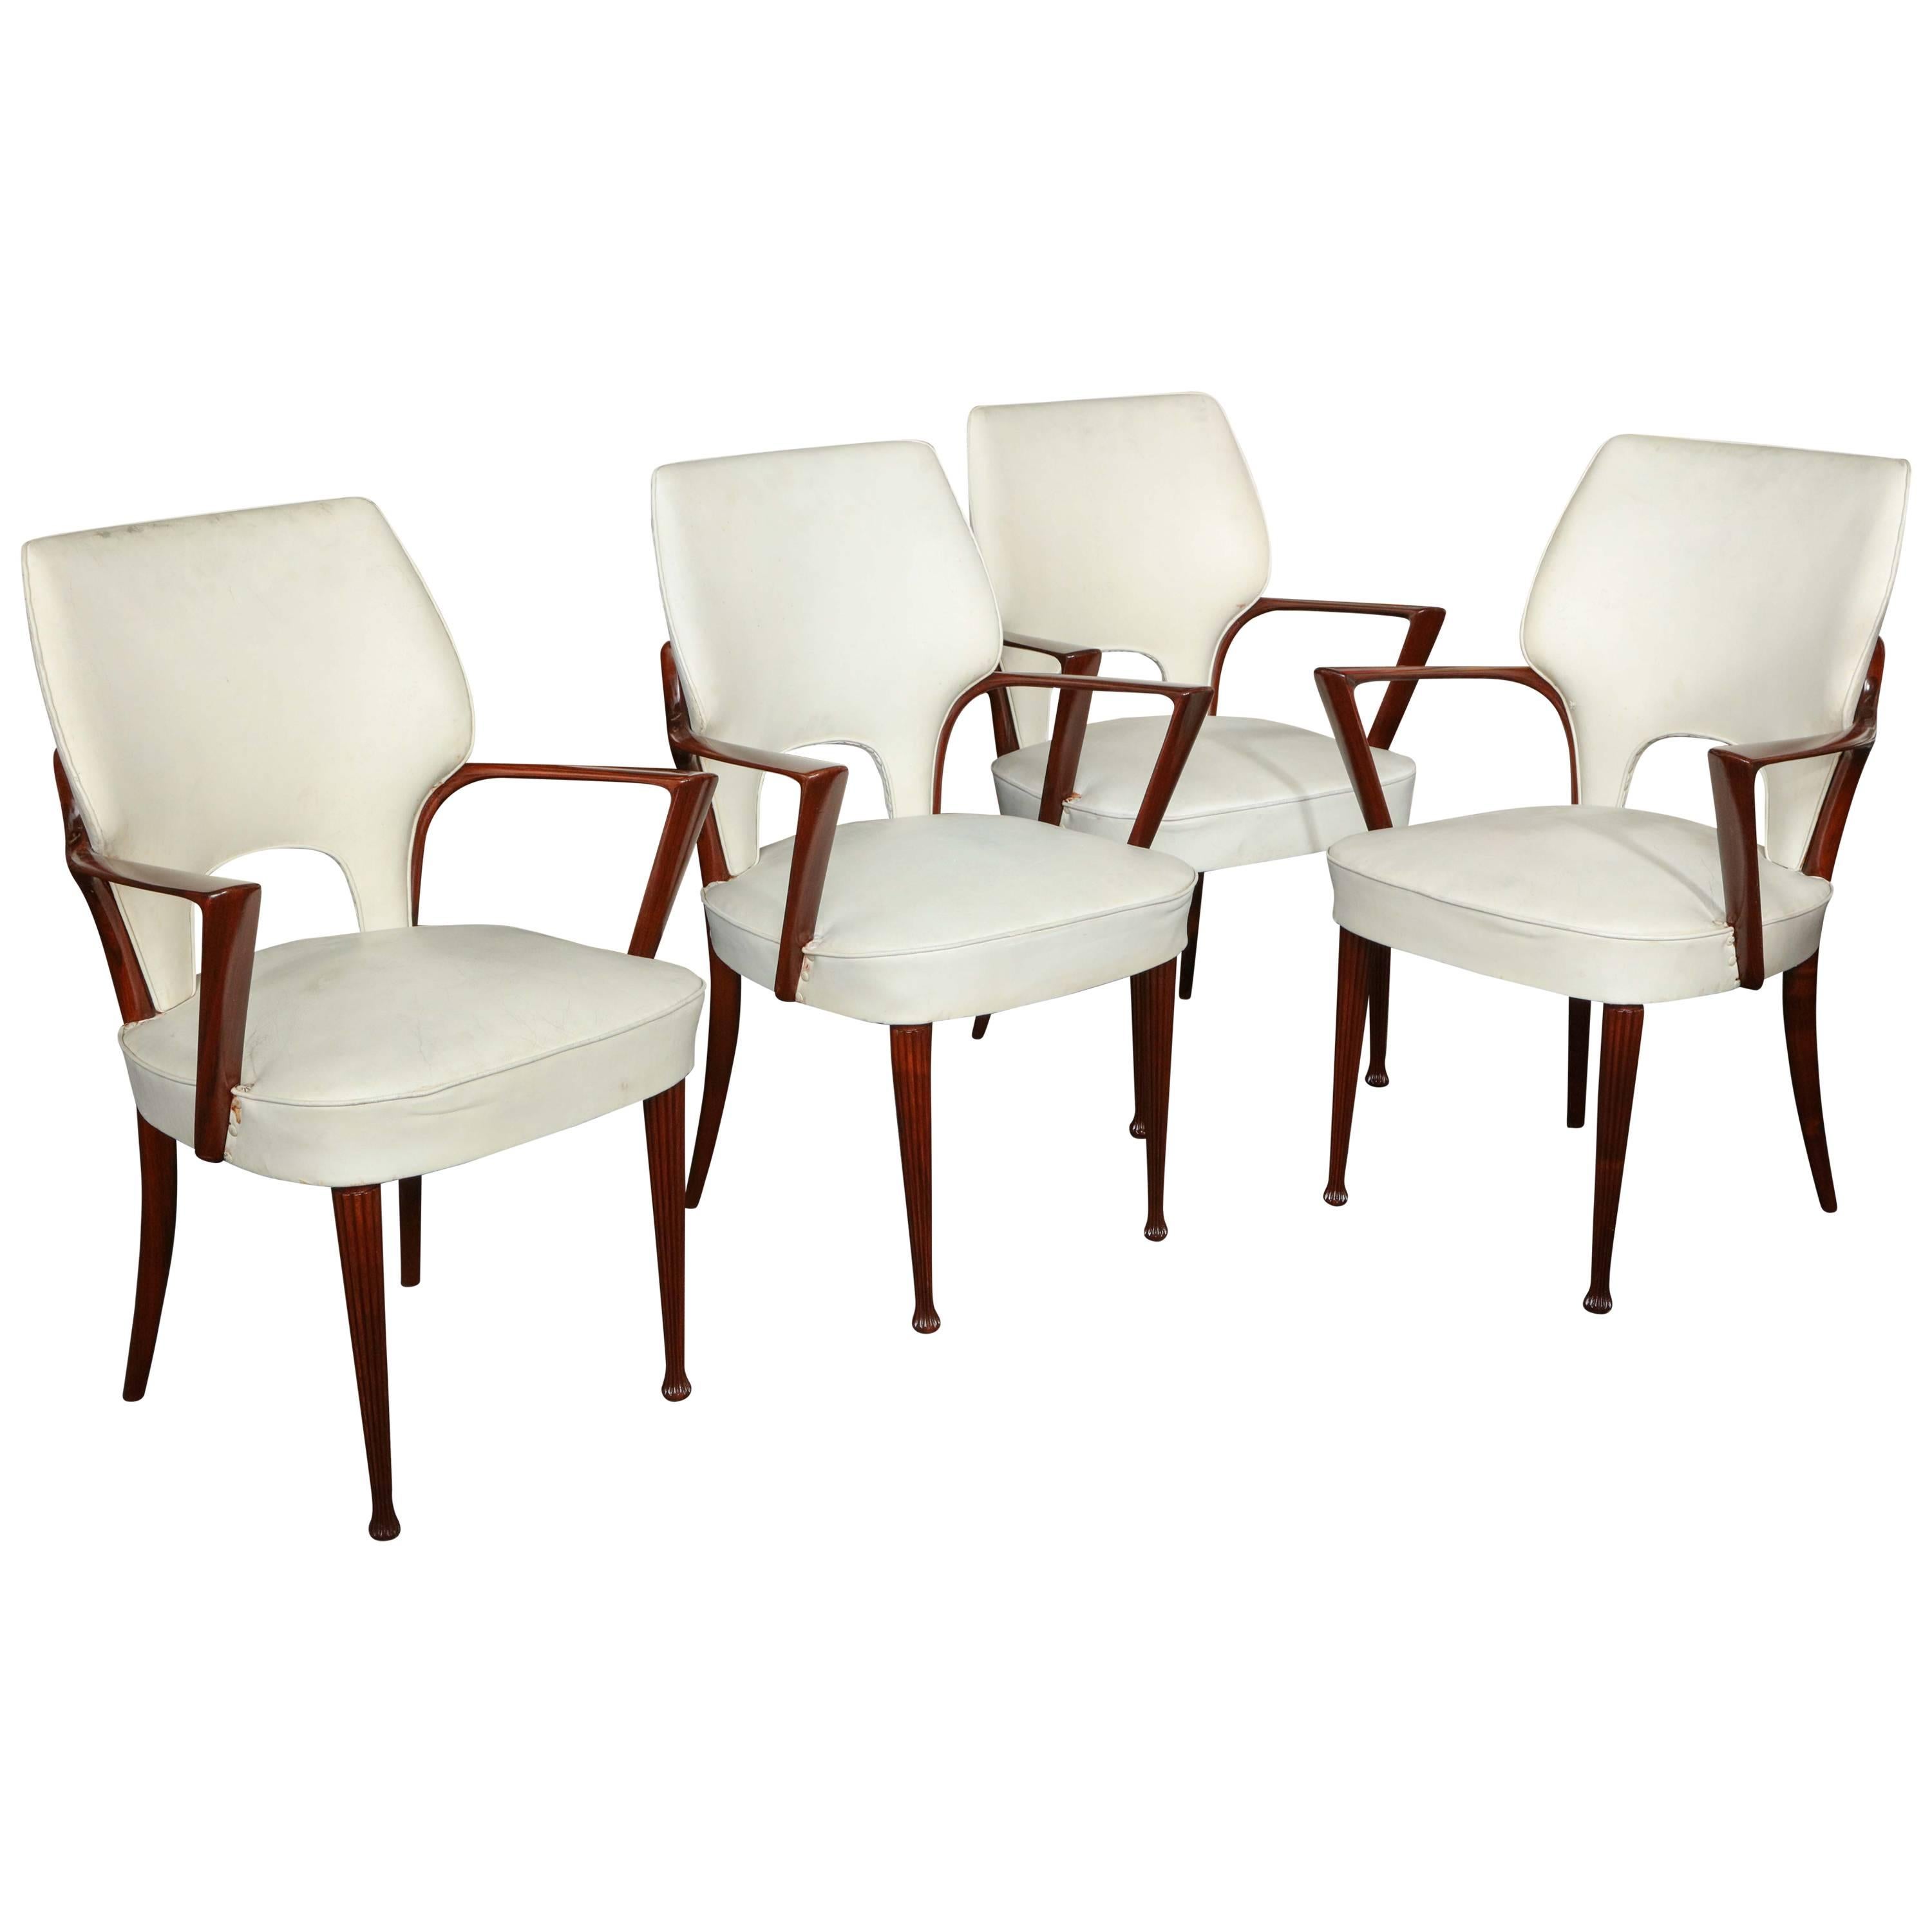 Four Dassi Chairs Made in Milan